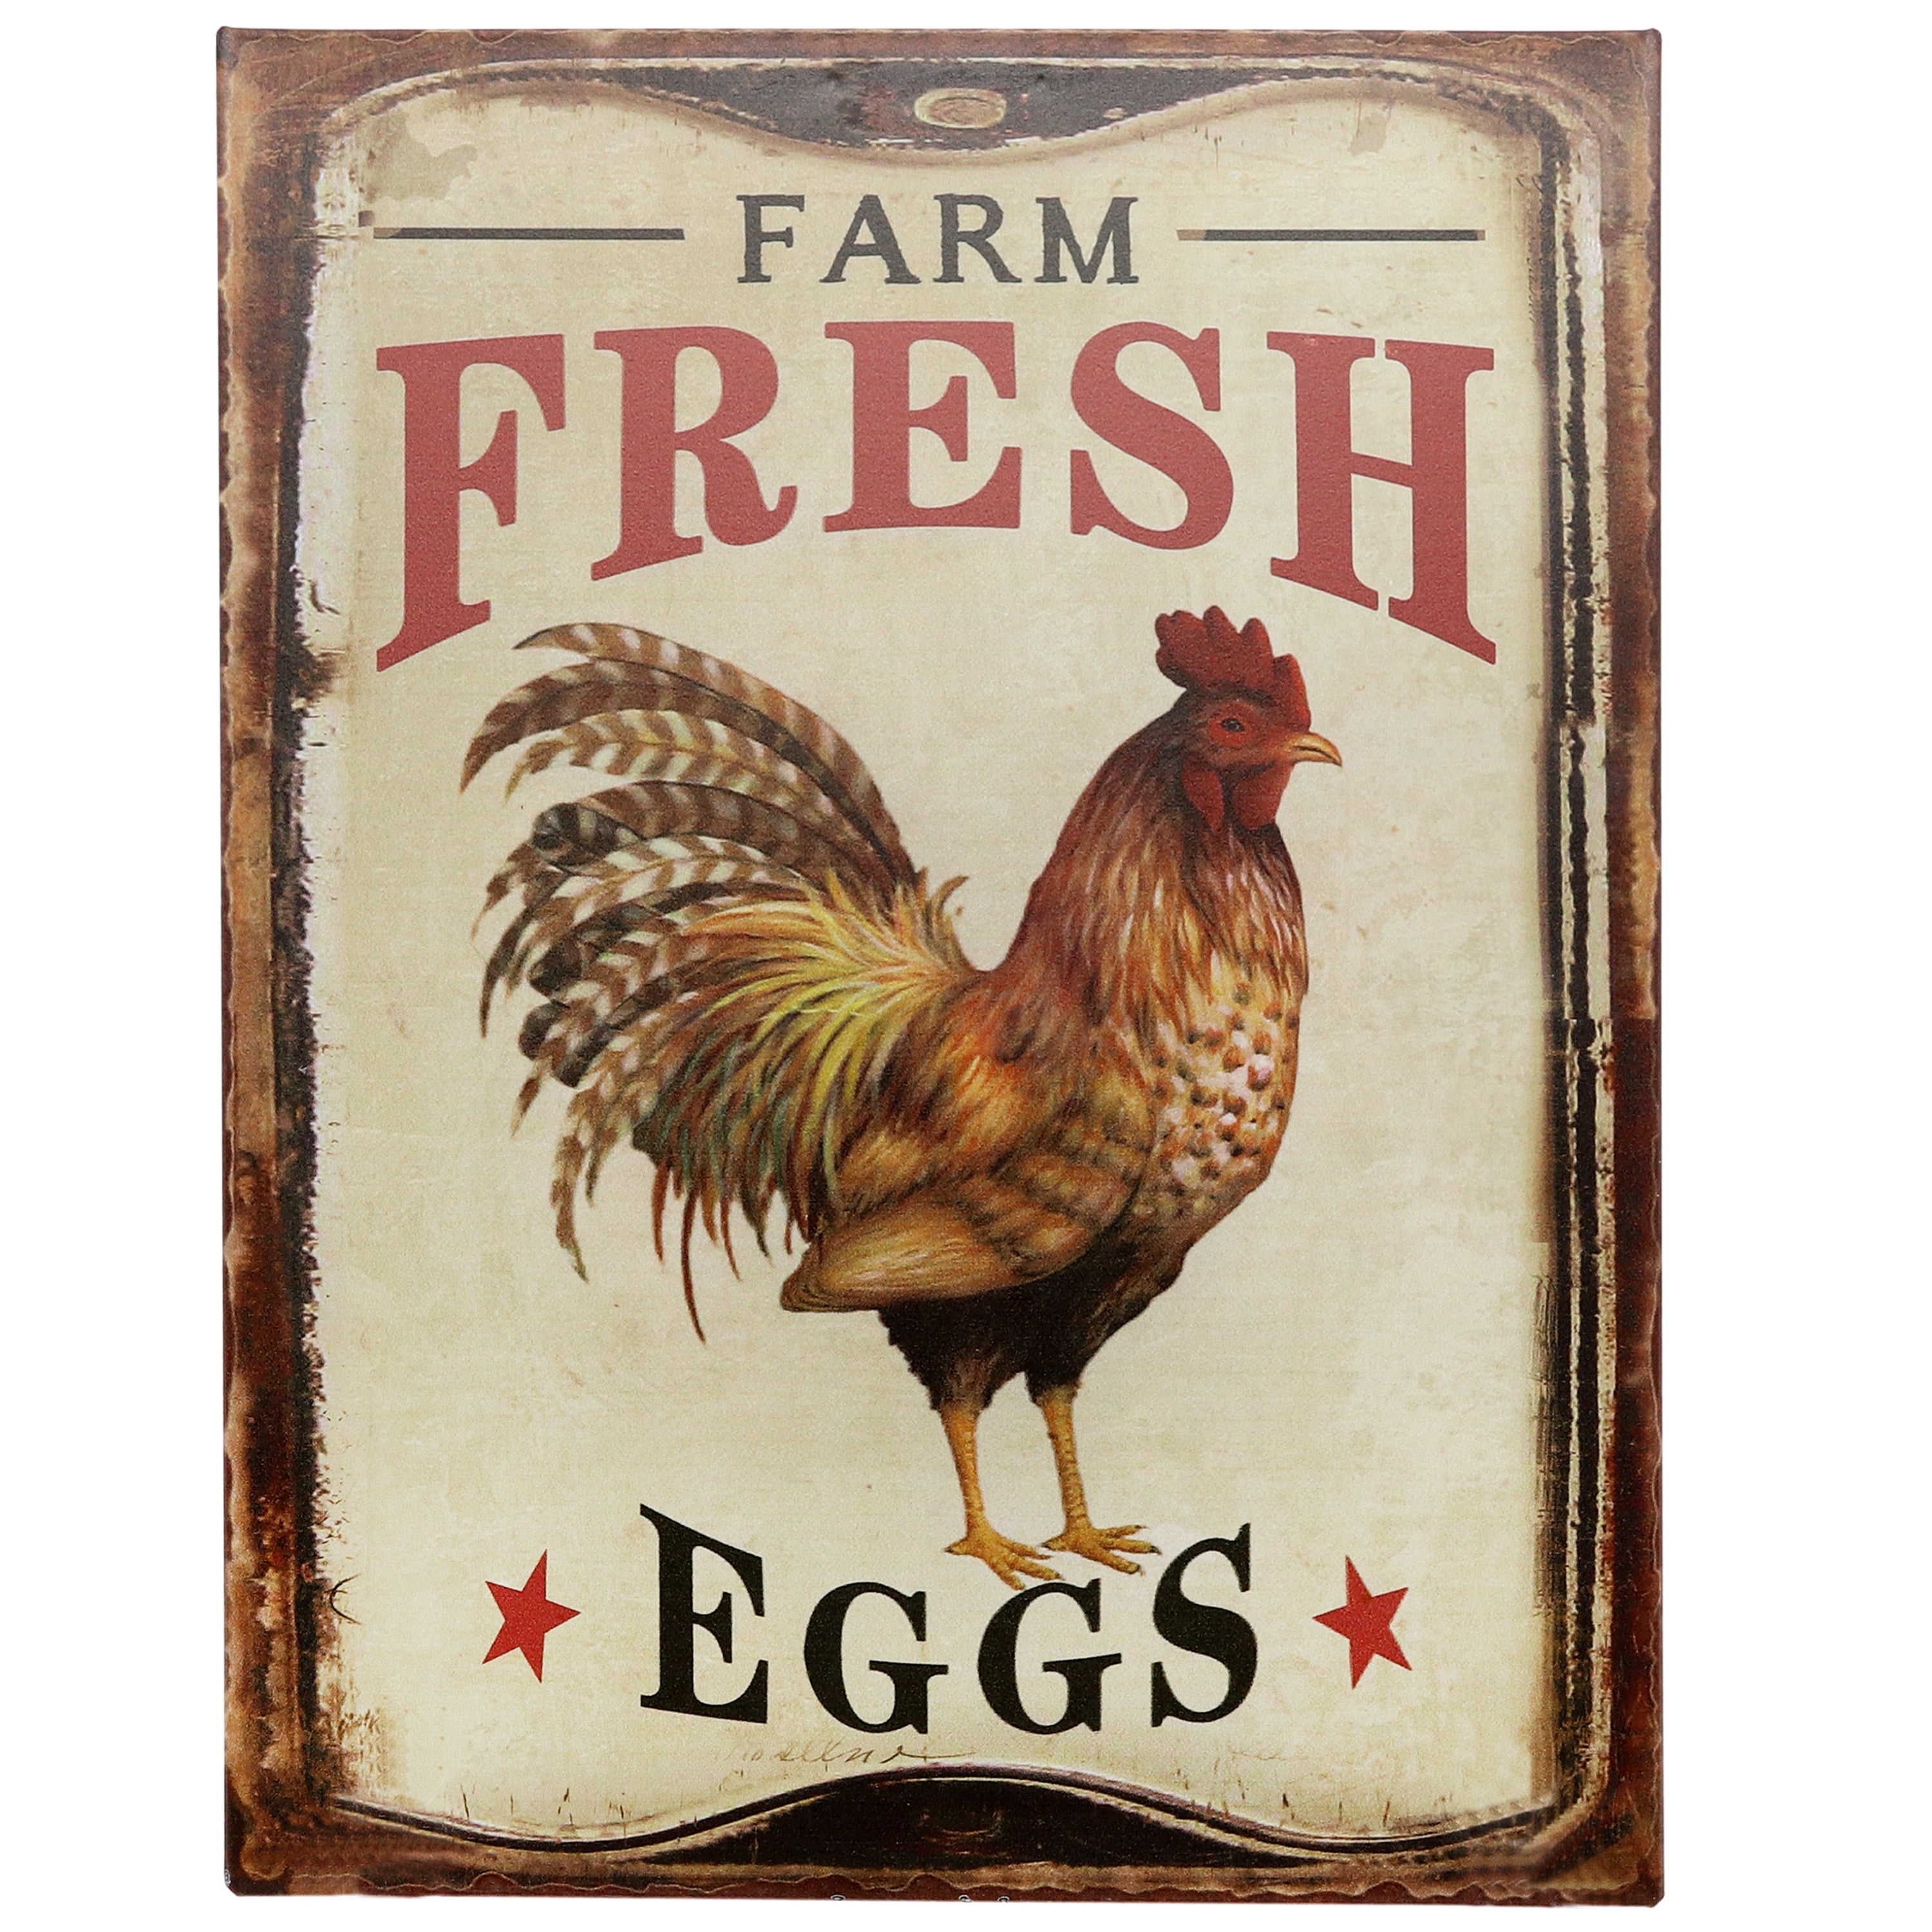 Rooster And Beer Metal Plate Sign Happy Chickens Vintage Plaque Rustic Poster